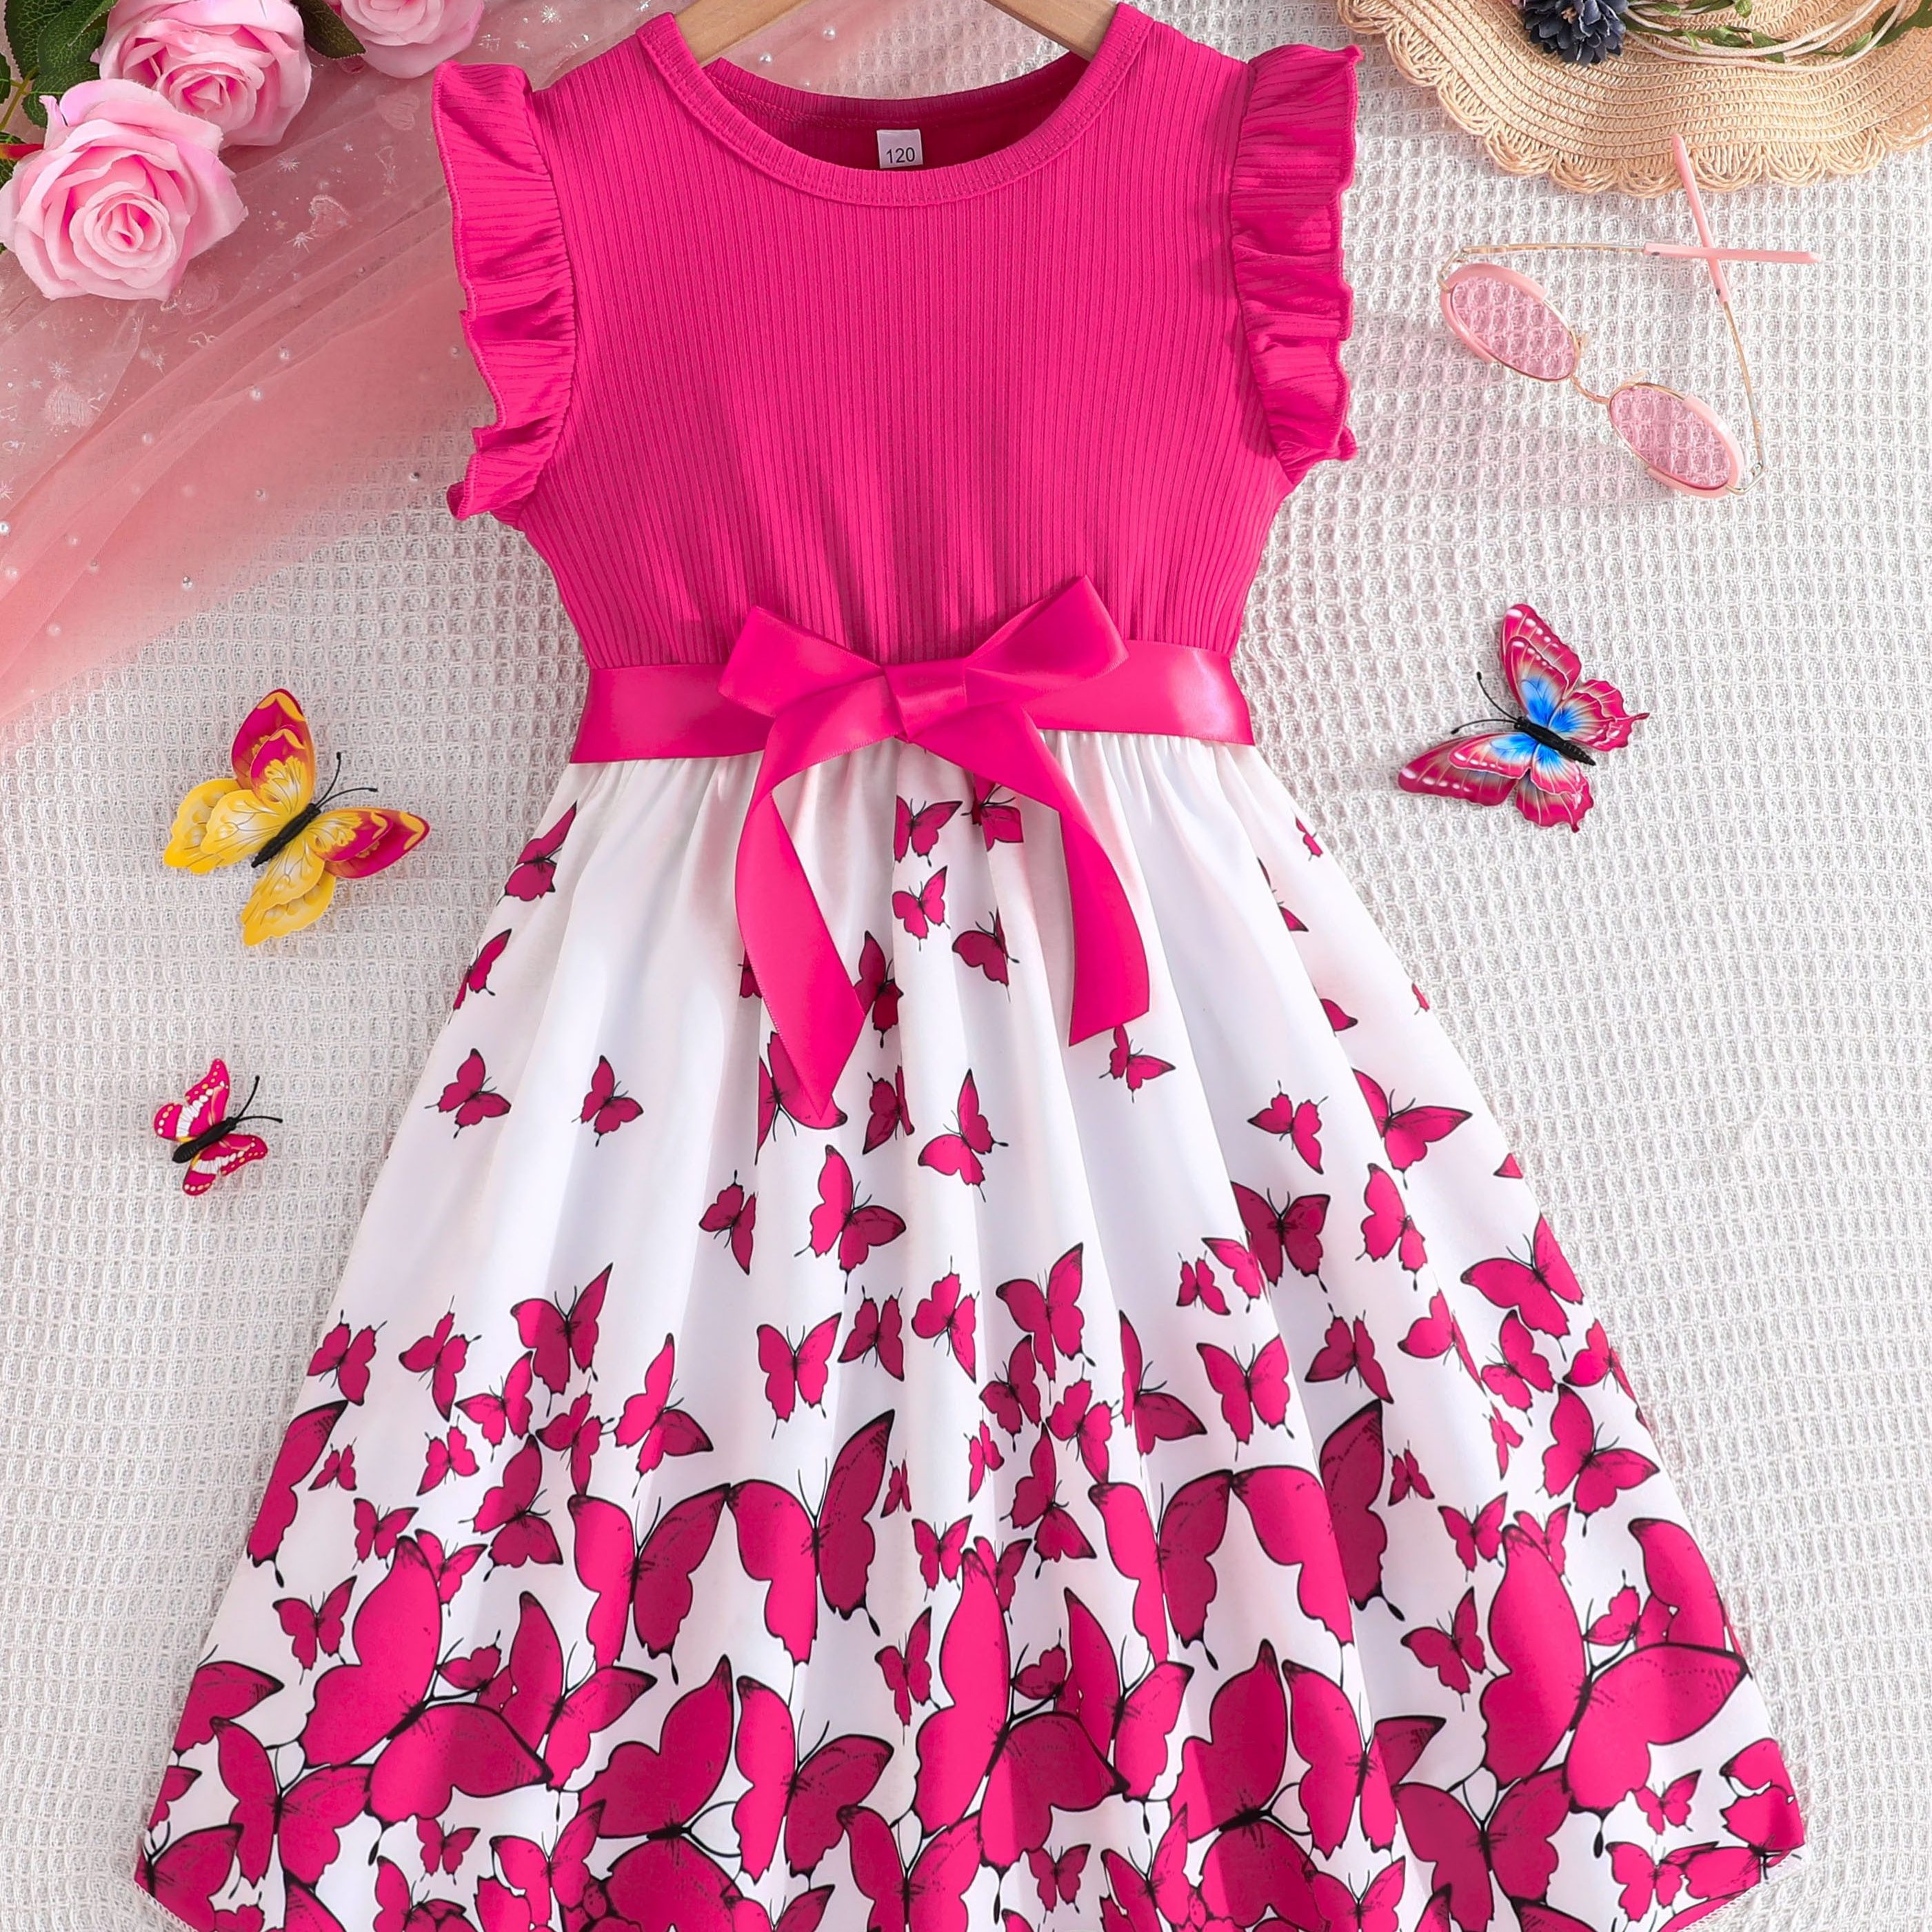 

Girl's Romantic Butterflies Splicing Dress Holiday Going Out Comfy Casual Dresses